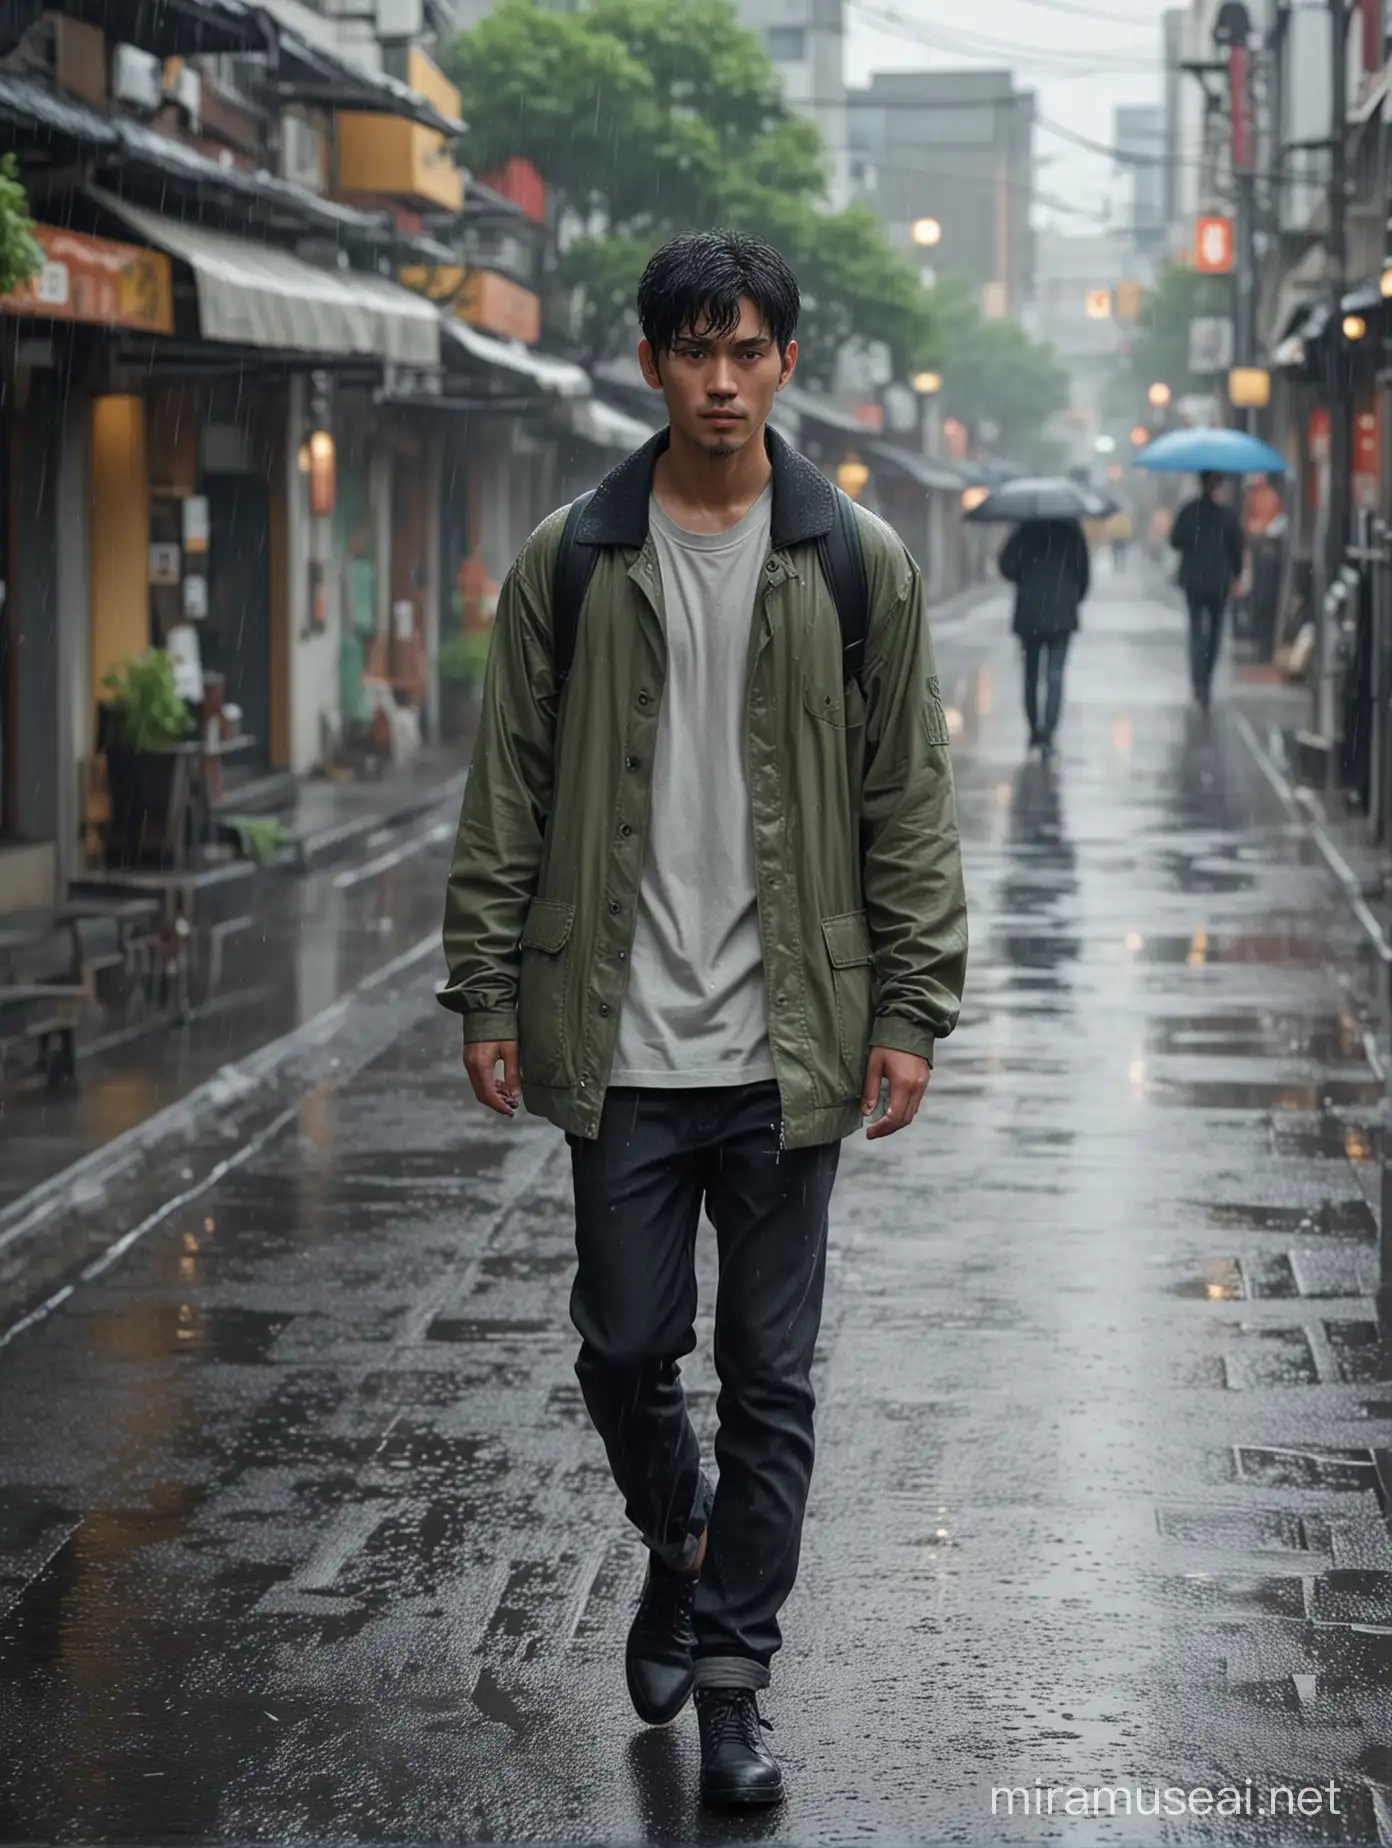 Japanese Model Walking Down Rainy Afternoon Street in Sage TShirt and Jacket